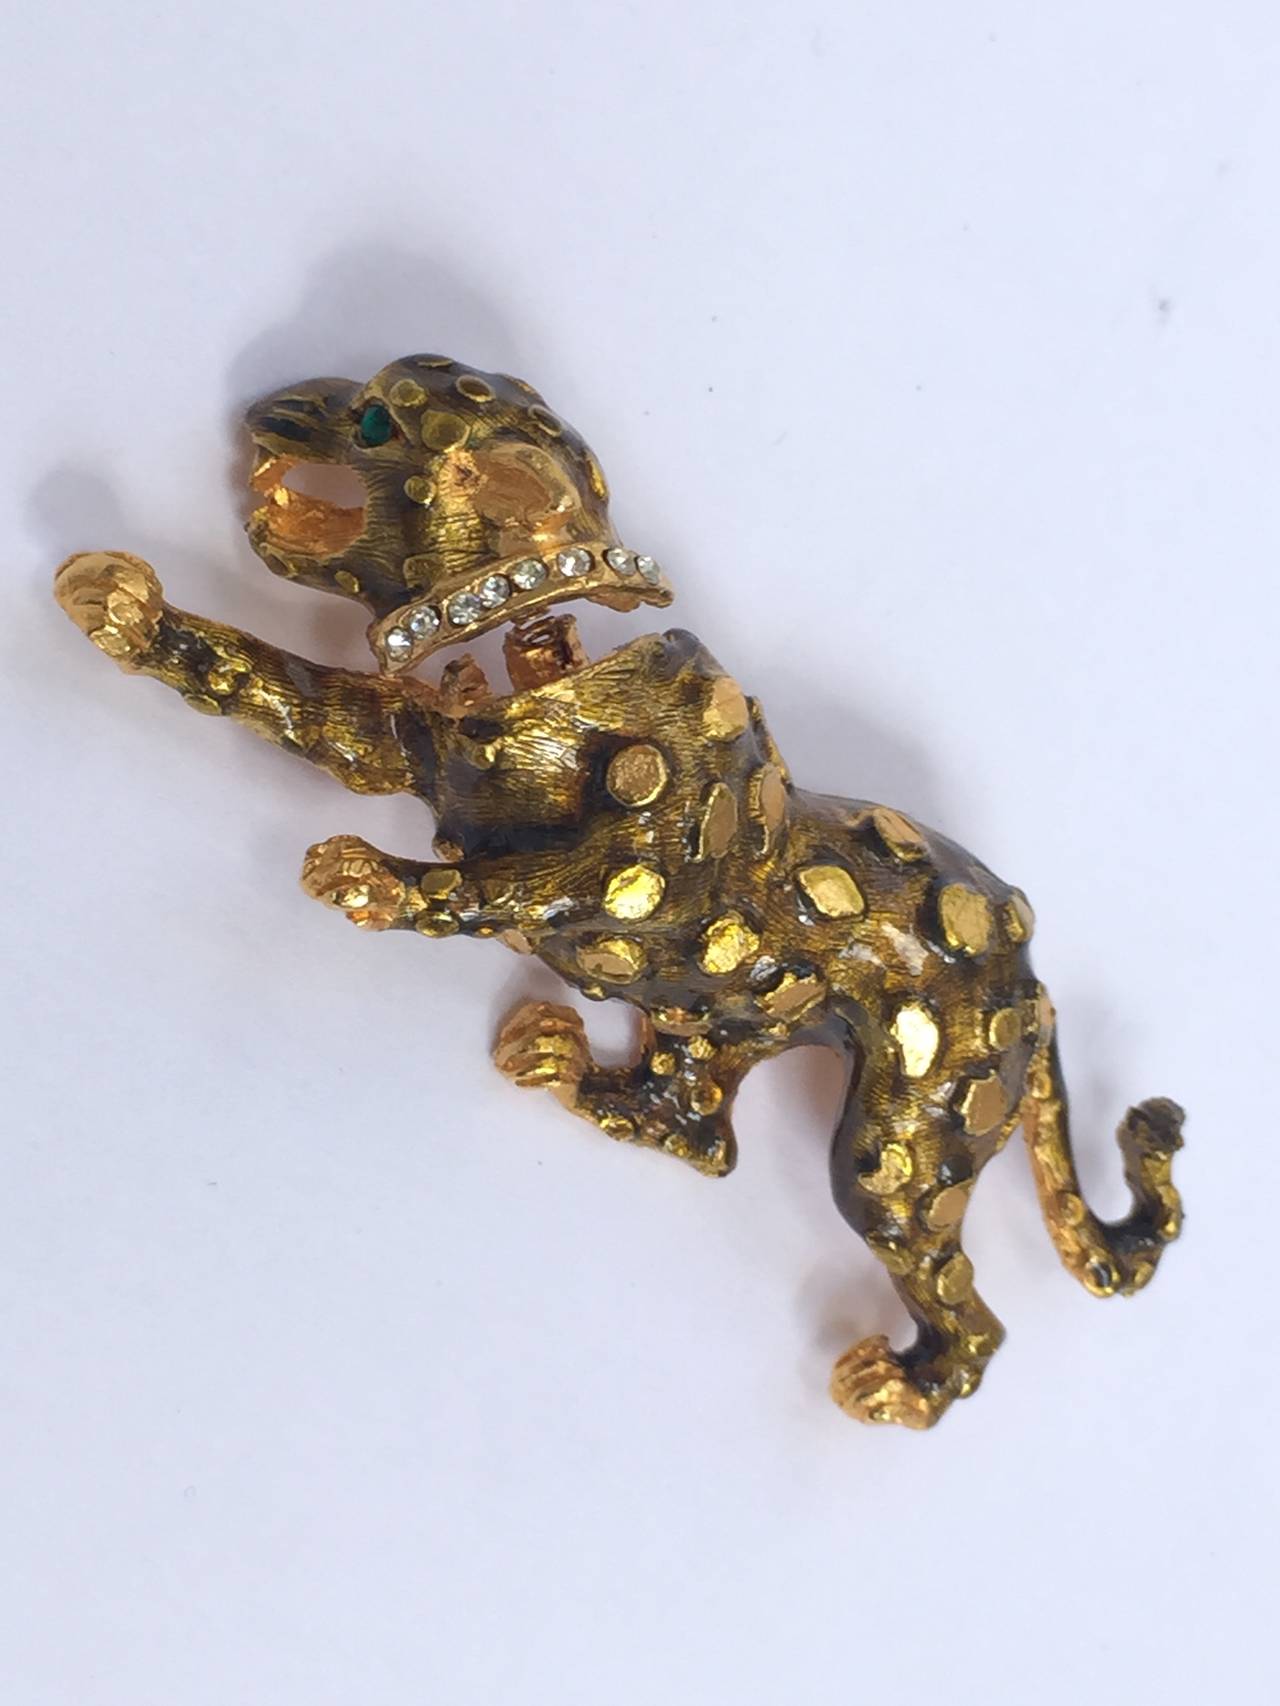 Hattie Carnegie 1960s brooch of a dog that head springs back and forth. Raised texture body with enamel rhinestone eye and clear crystals around collar. 
Measurements are:
2. 1/2